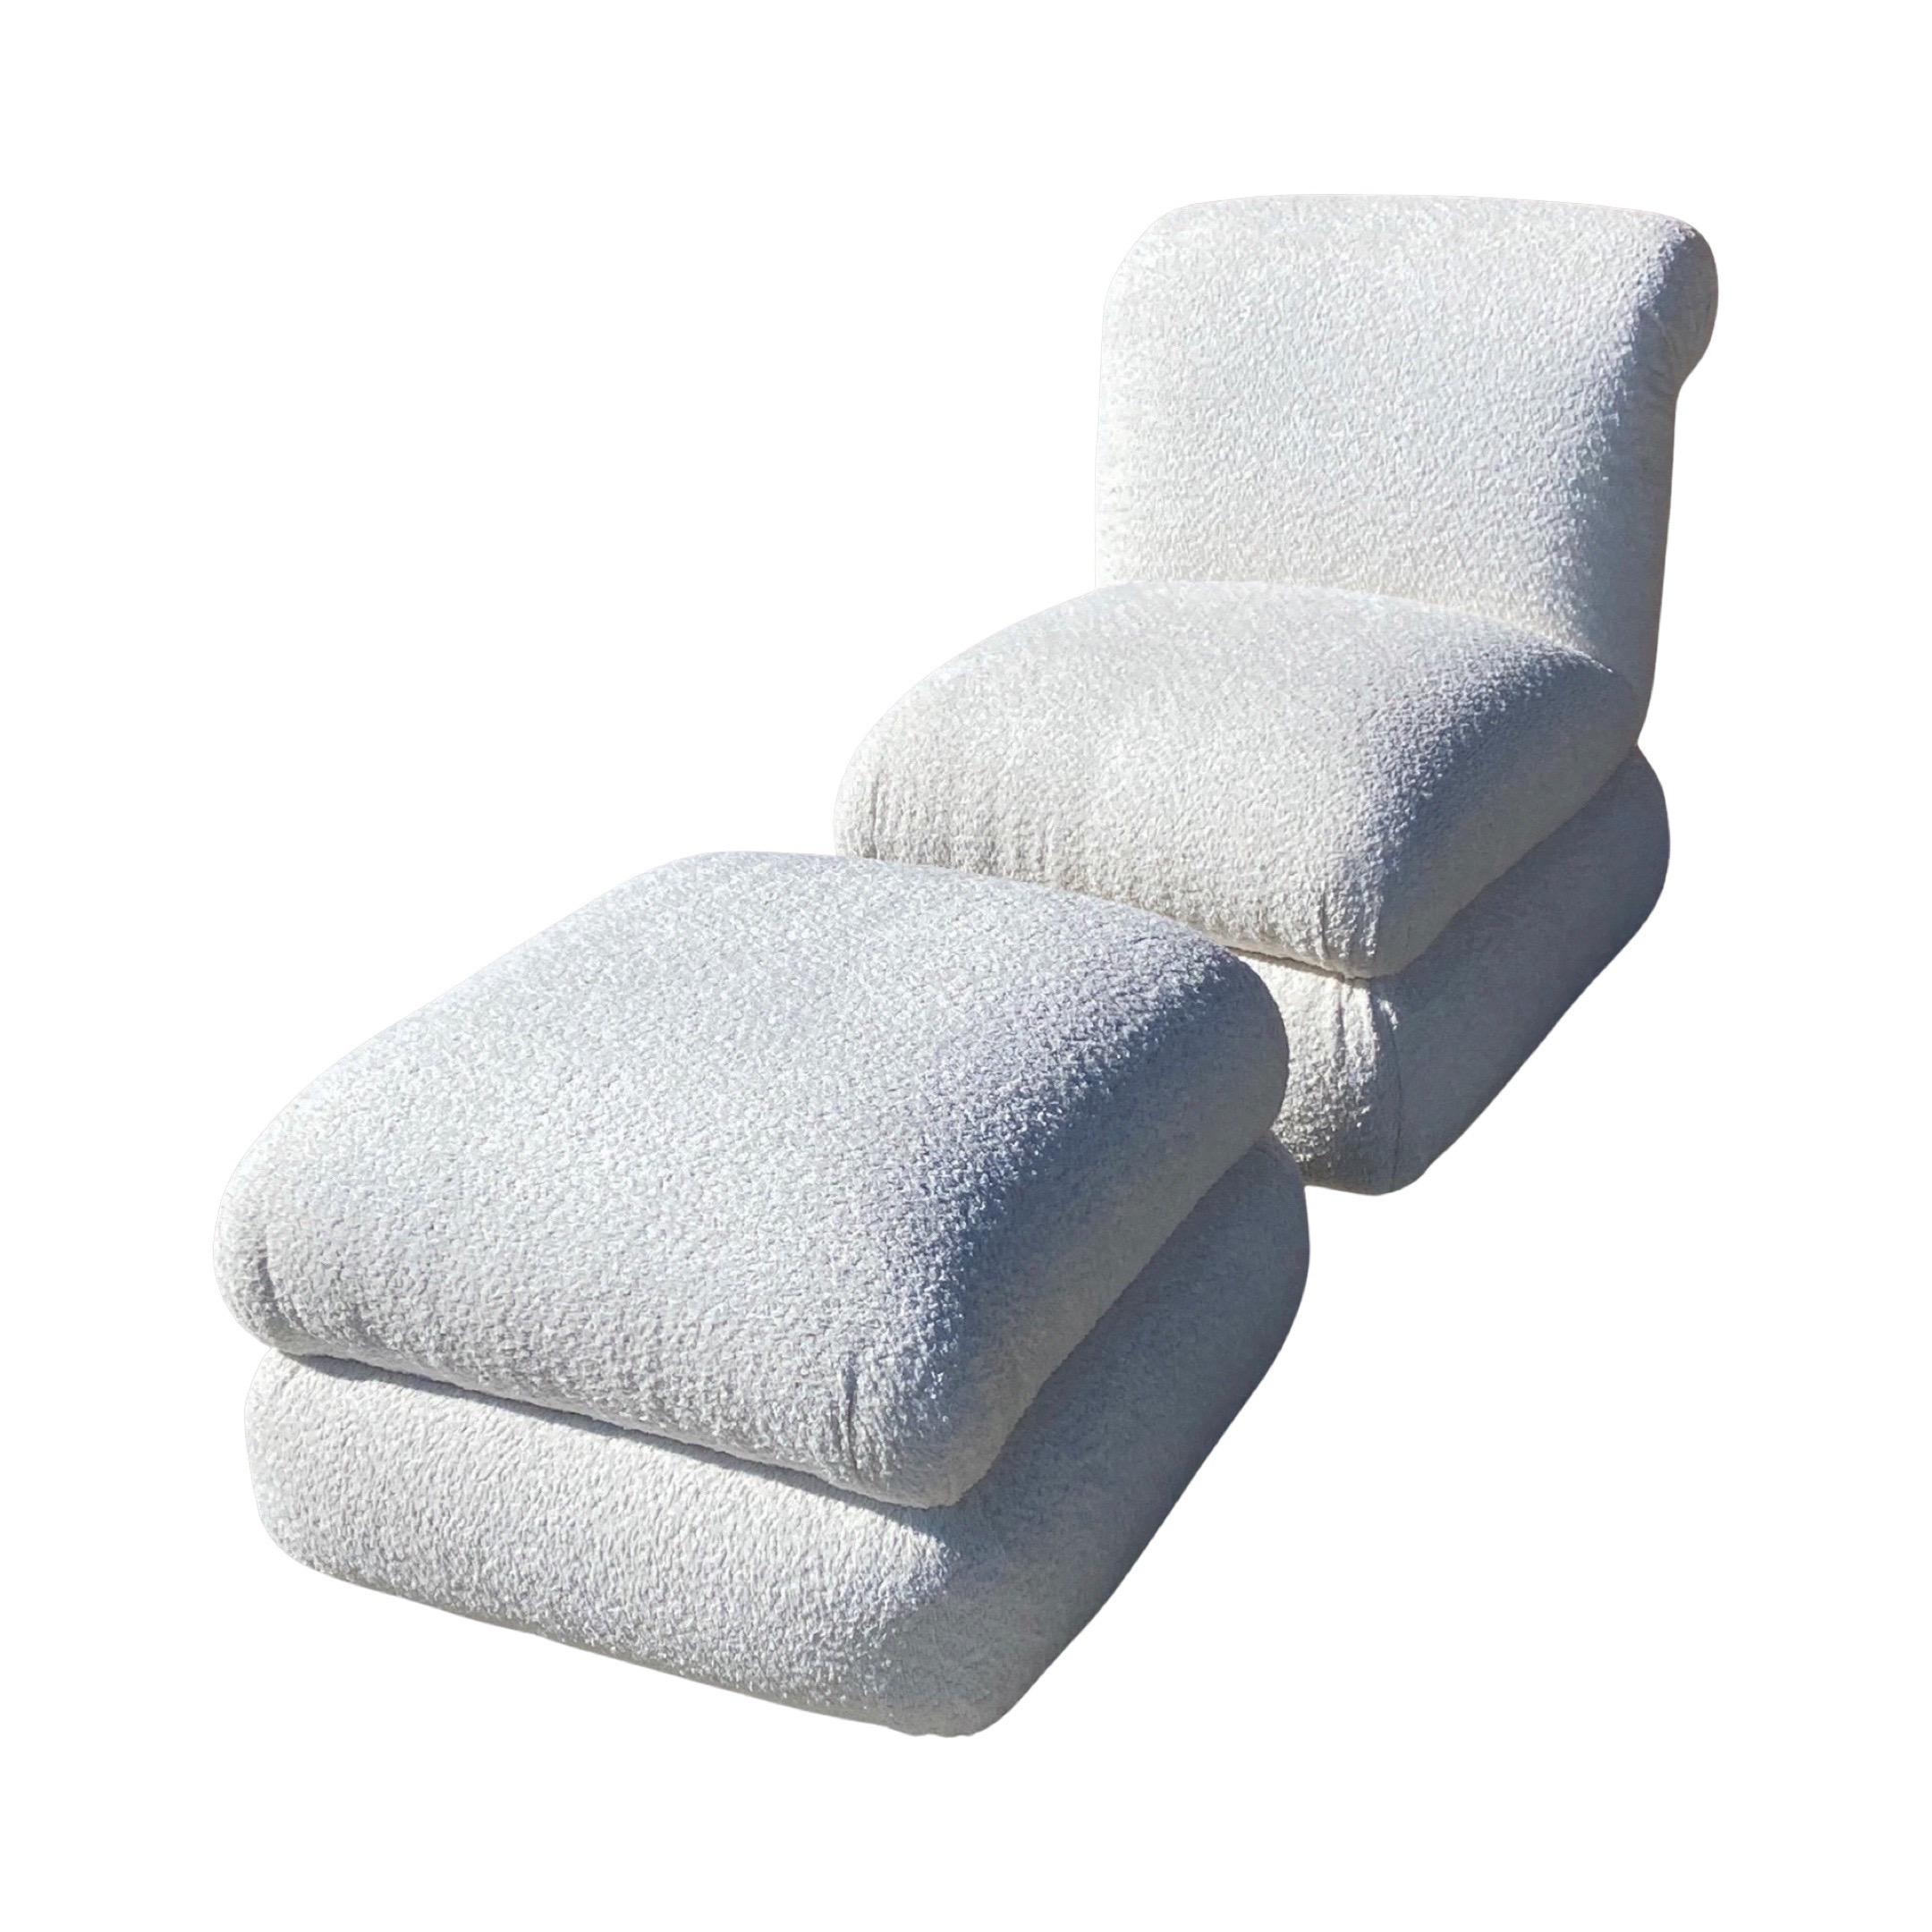 We didn’t want to change the amazing 1980s Phyllis Morris chair and ottoman, we just wanted to reimagine it in European off-white boucle. The set is stunning. The design not only holds up today, it’s better than ever. The shape reminds us of a